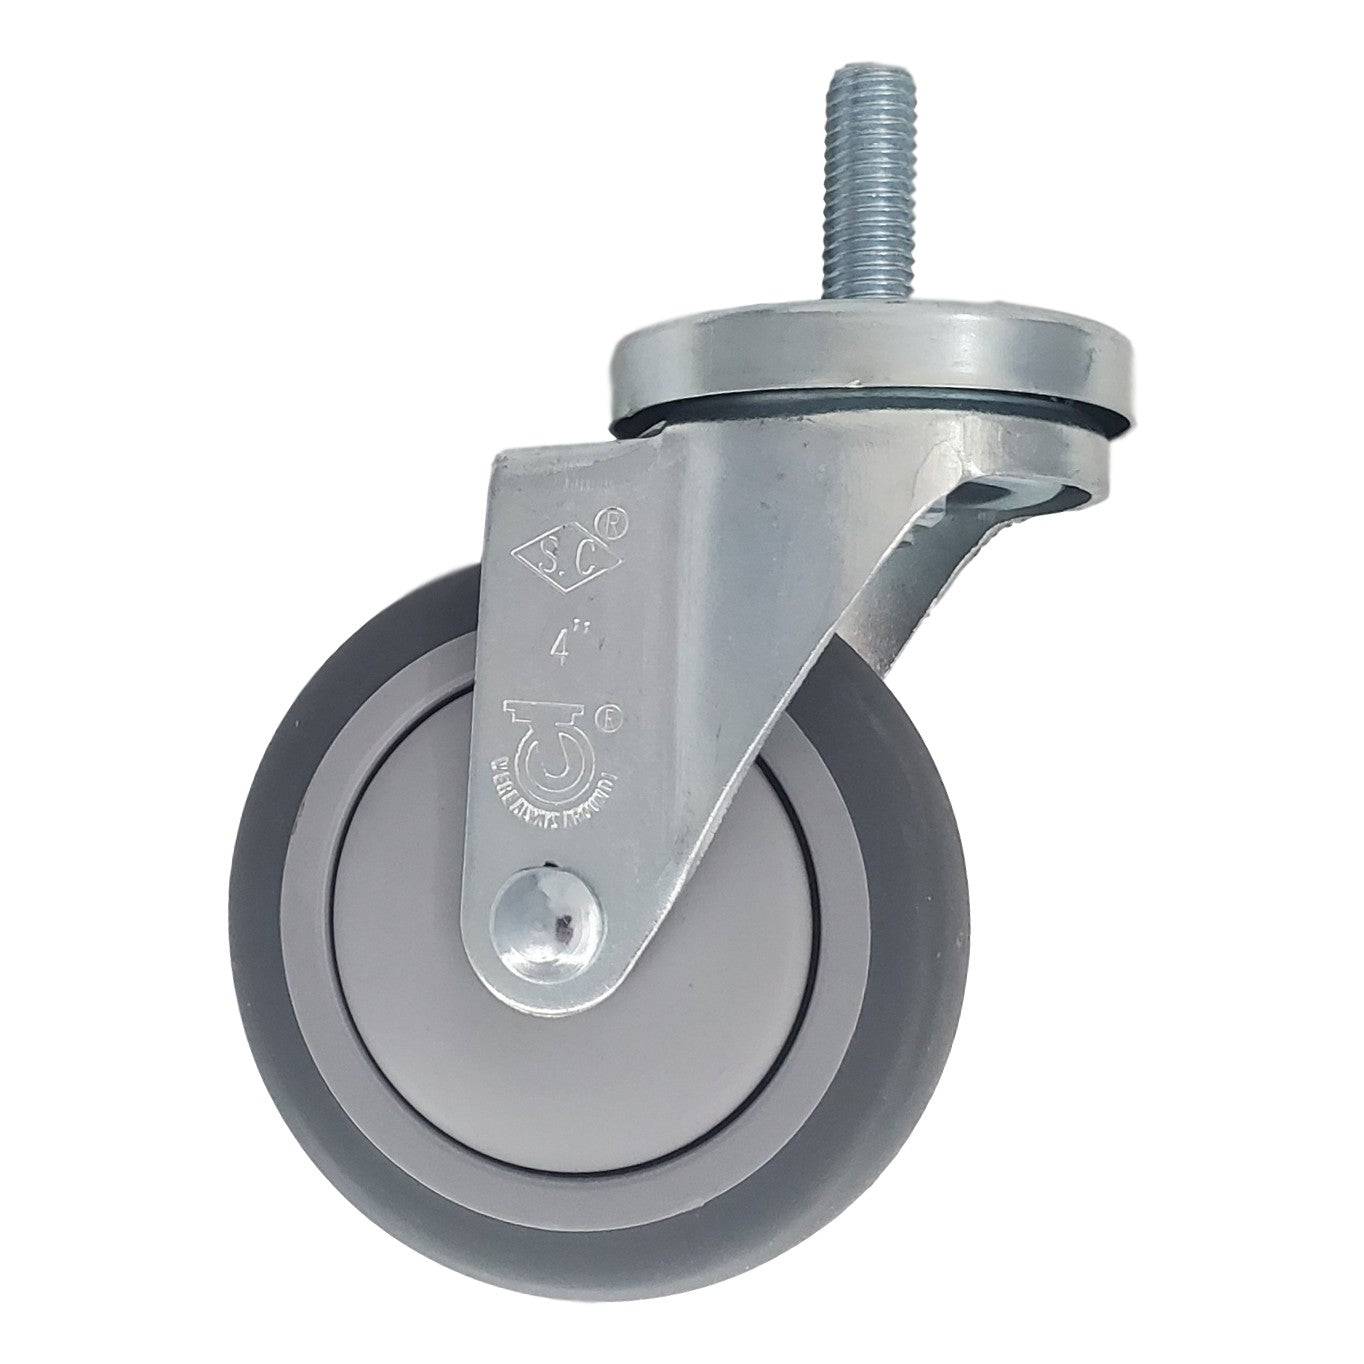 4" x 1-1/4" Thermo-Pro Wheel Threaded Swivel Stem Caster (1/2") - 250 lbs Cap. - Durable Superior Casters